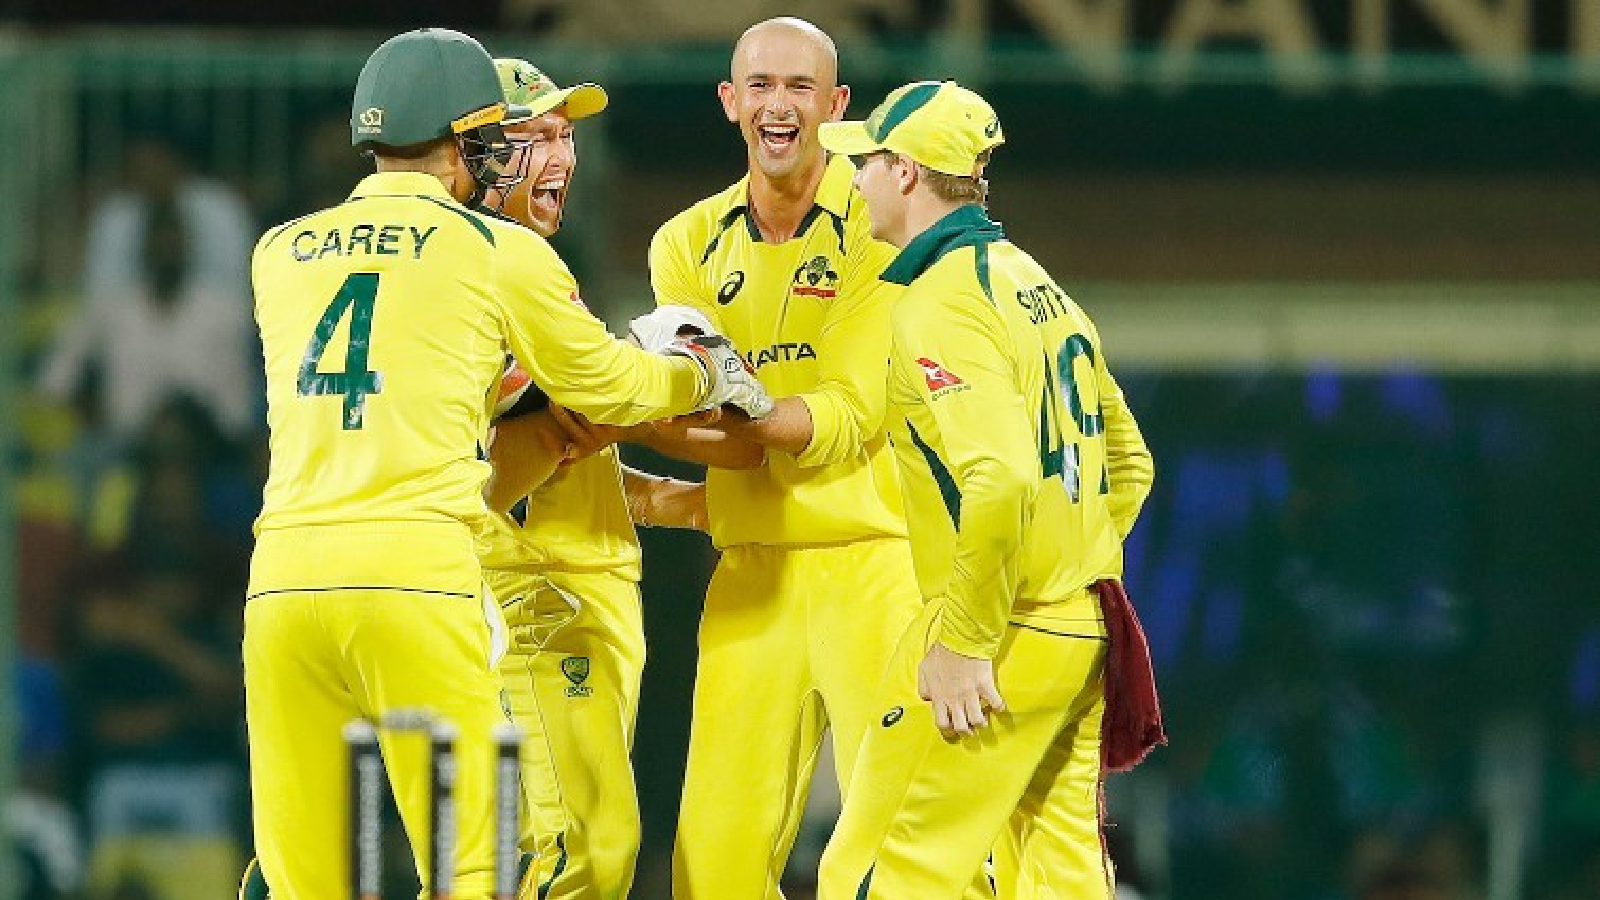 t20-world-cup-make-the-most-of-life-it-can-t-last-forever-after-conquering-mental-demons-aussie-ashton-agar-focusing-on-just-being-a-good-person